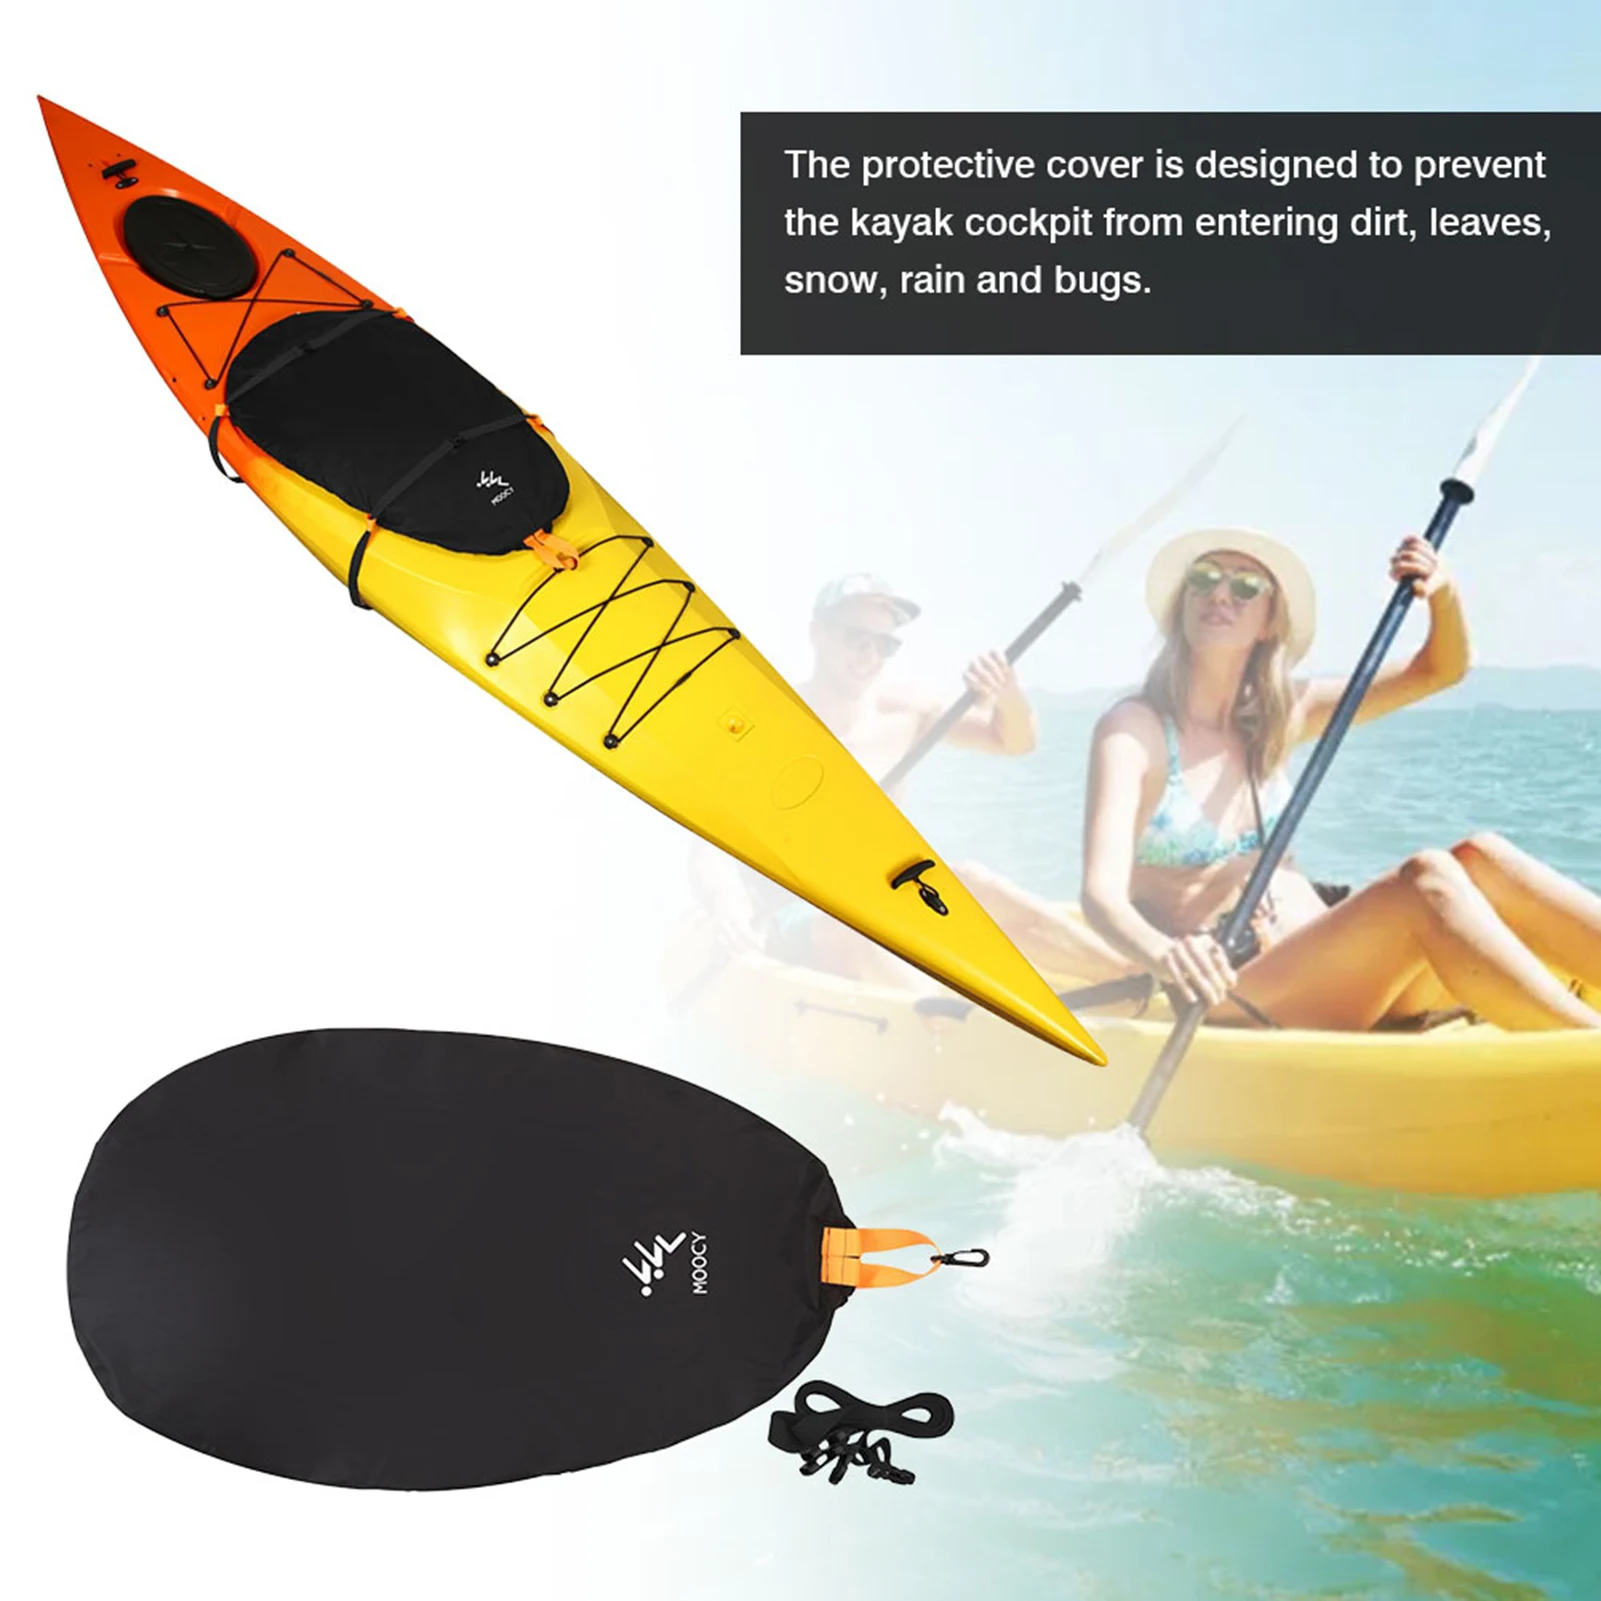 Kayak Cockpit Cover Black/S-XL Kayak Cover Accessories，Kayak Cover Sun Protection Cockpit Dust Cover Shield Protector 